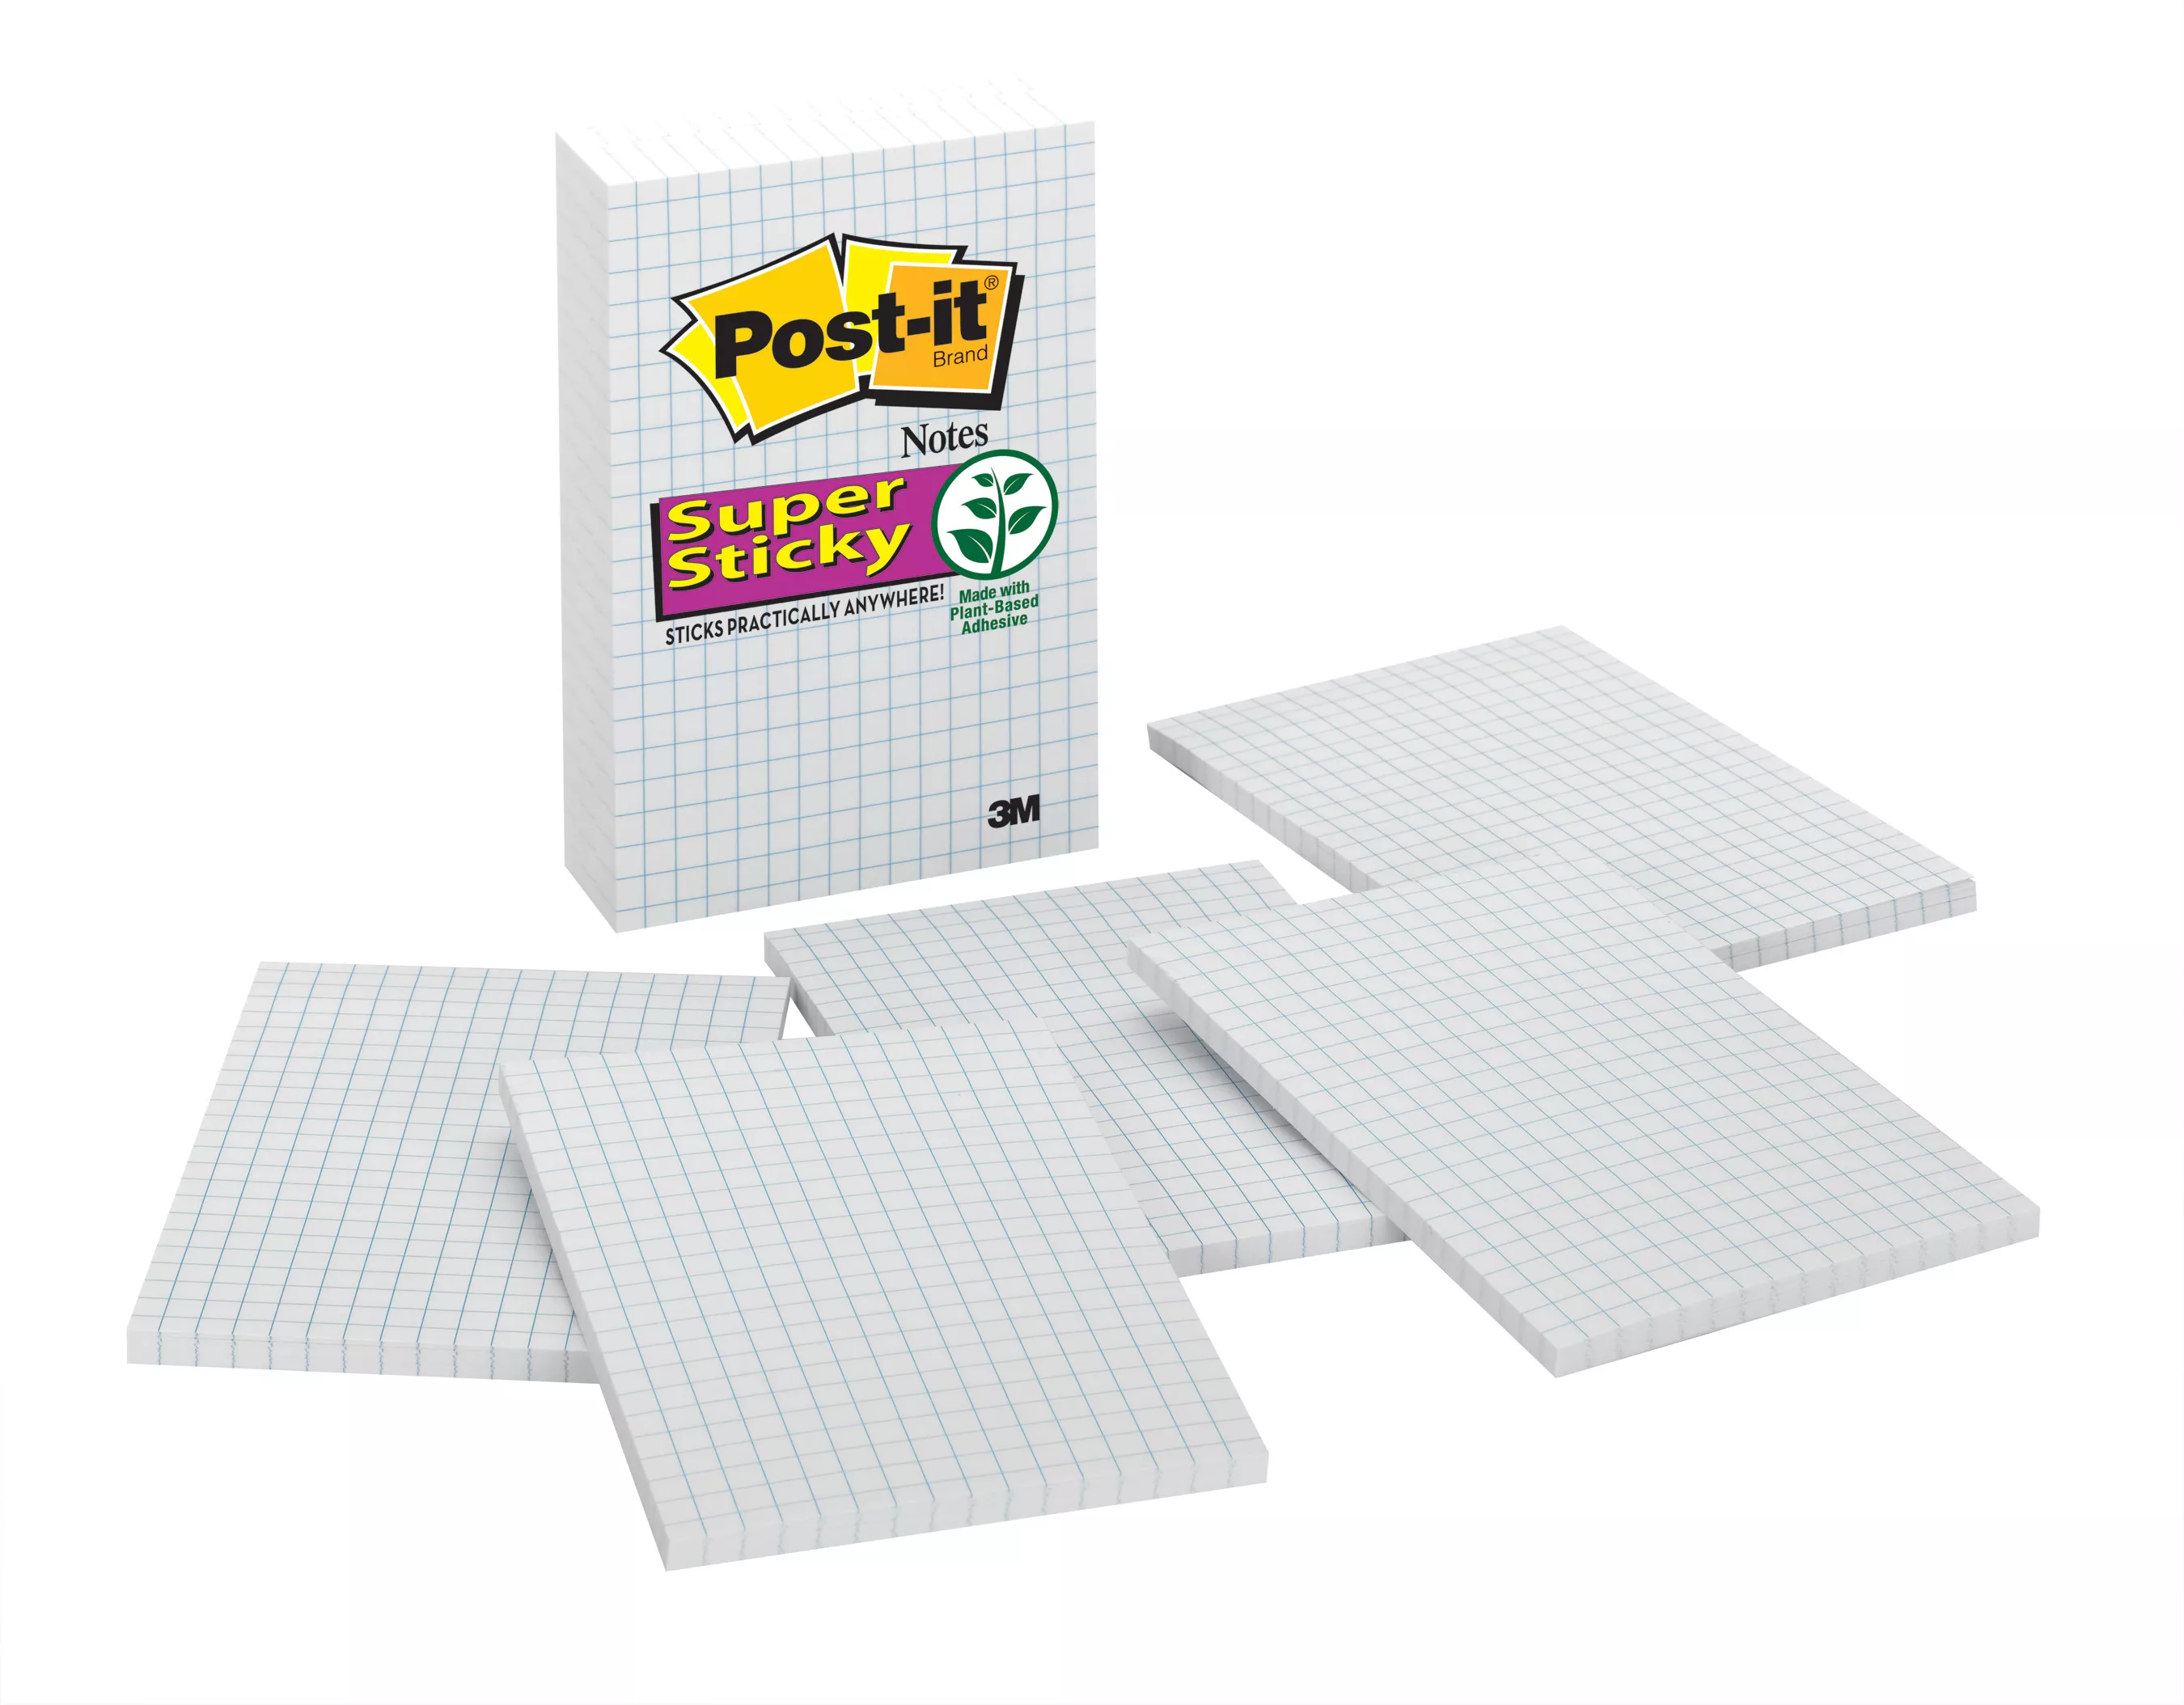 Post-it® Super Sticky Notes 660-SSGRID, 3.9 in x 5.8 in (99 mm x 147 mm)
Grid Pattern, 3 Pads/Pack